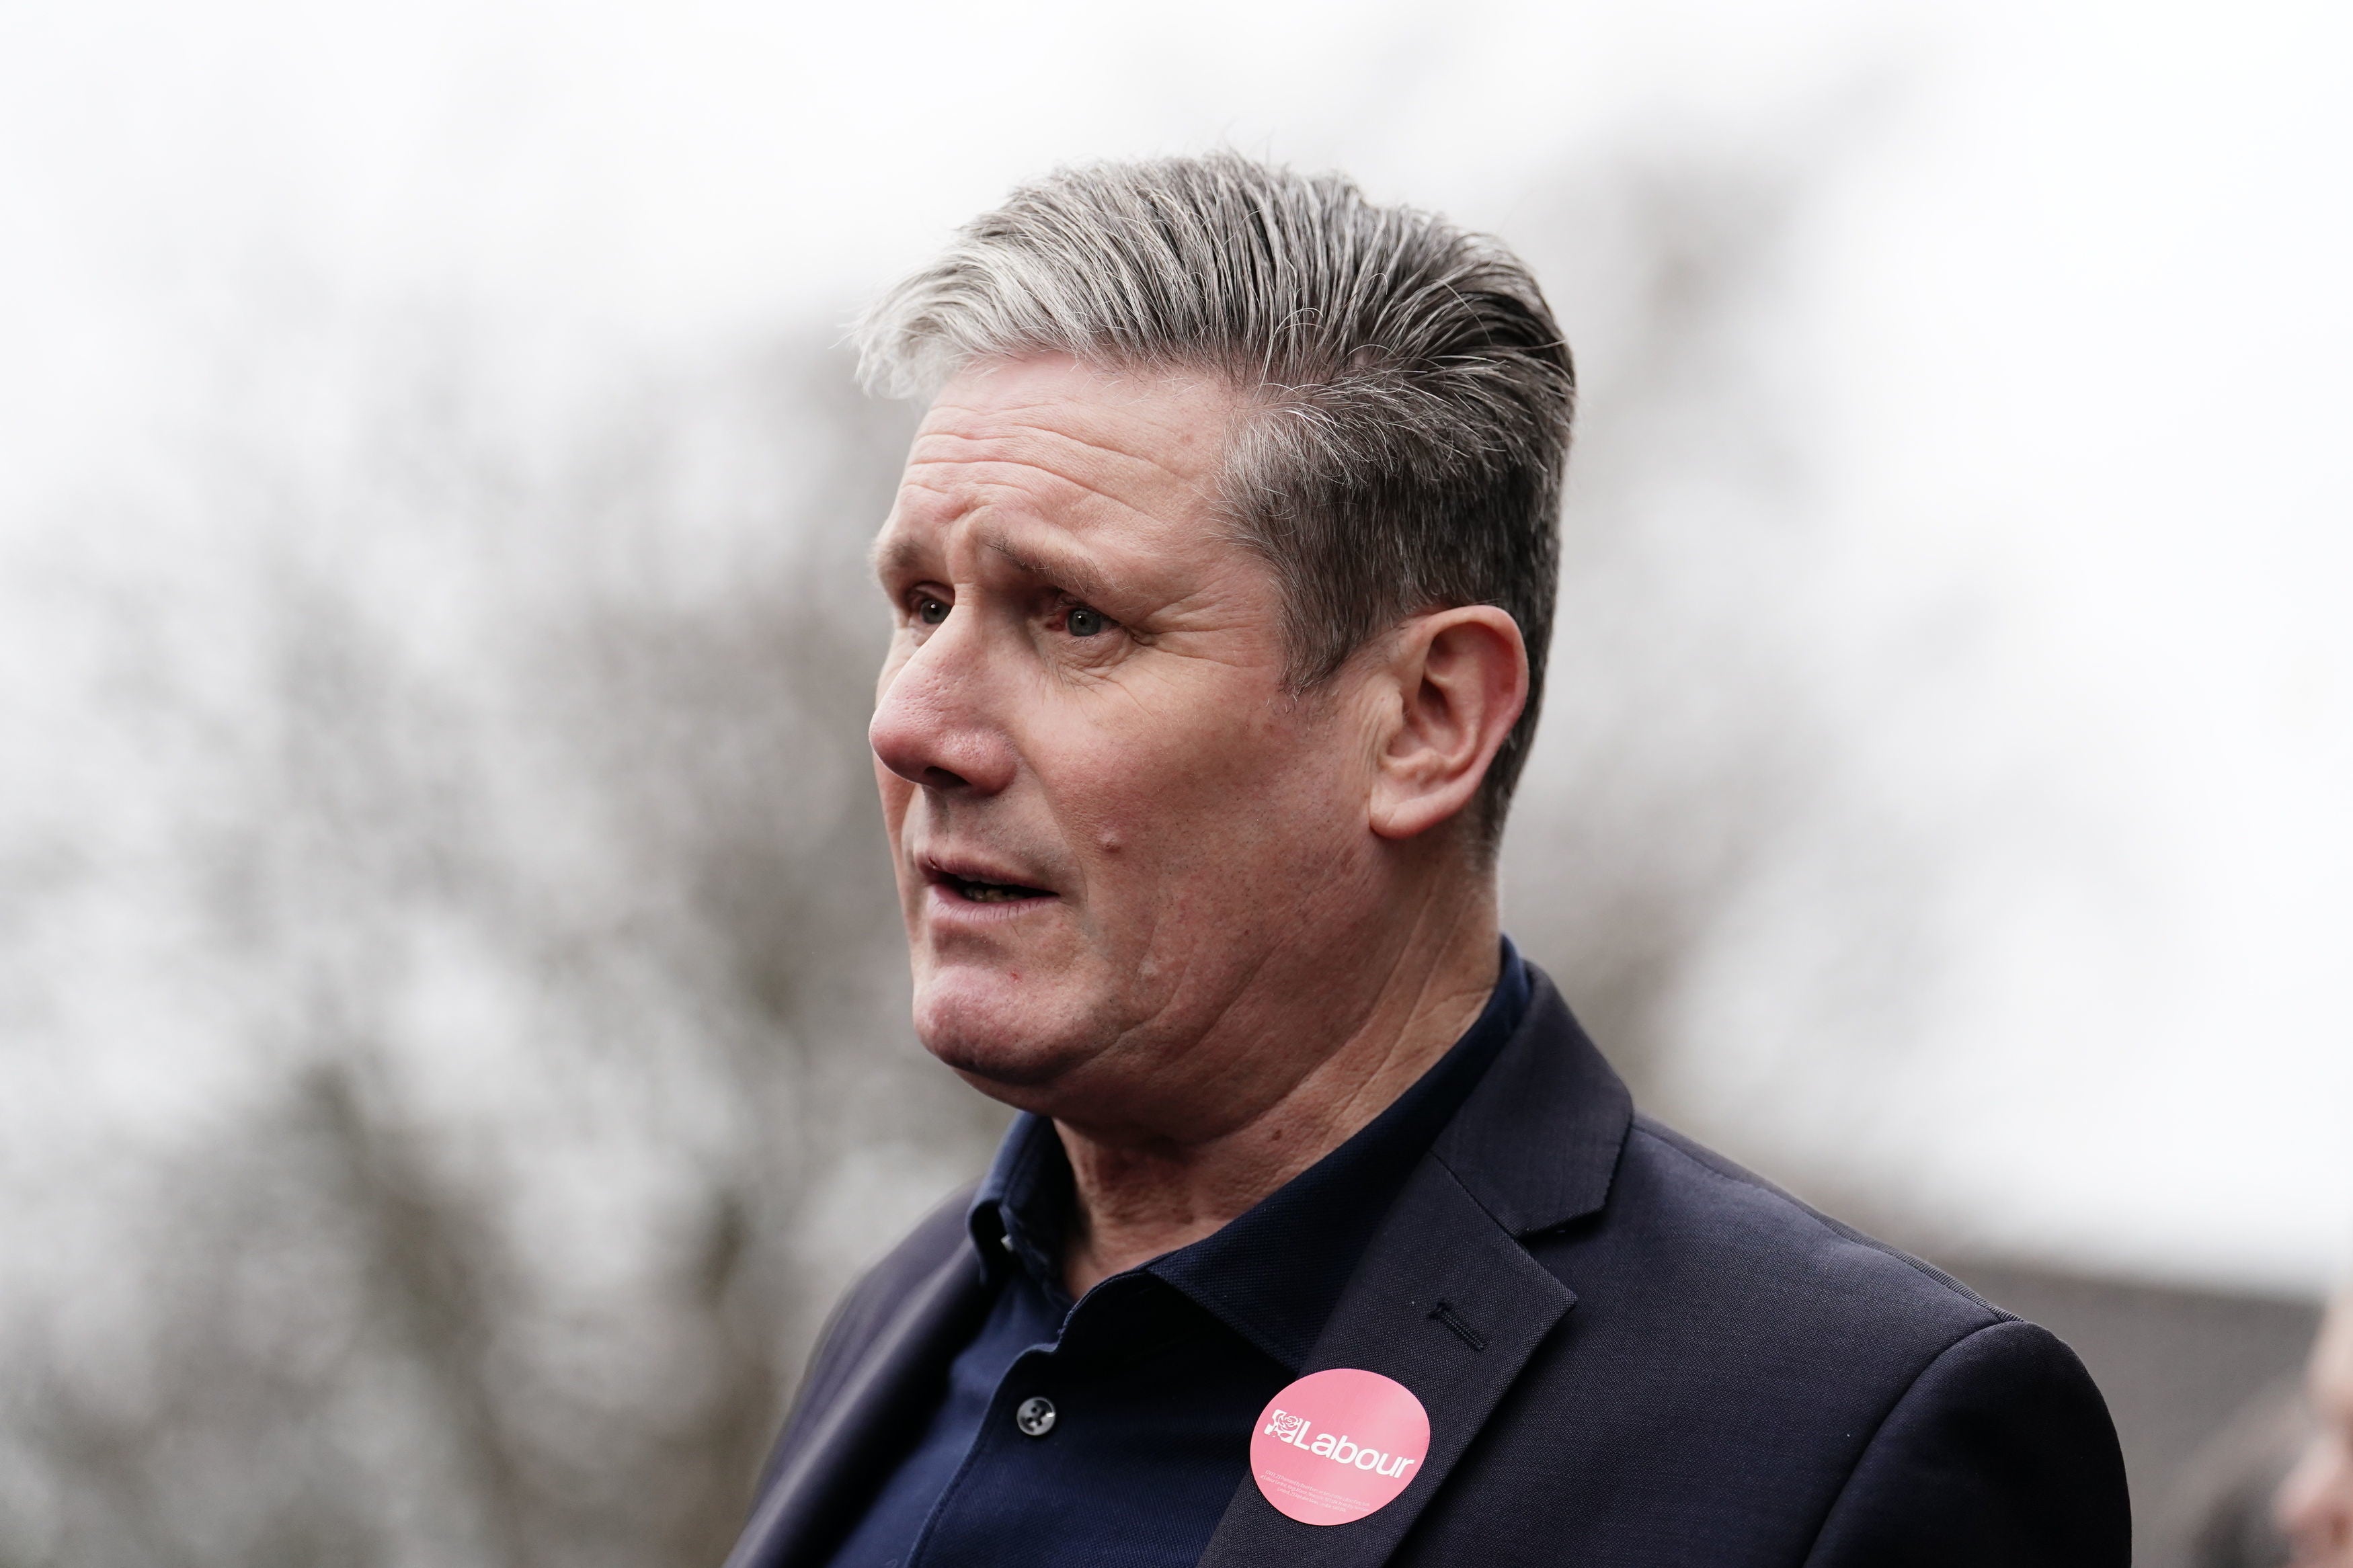 Keir Starmer is ‘underwhelming’ and sparks ‘little enthusiasm’ among voters, according to pollsters